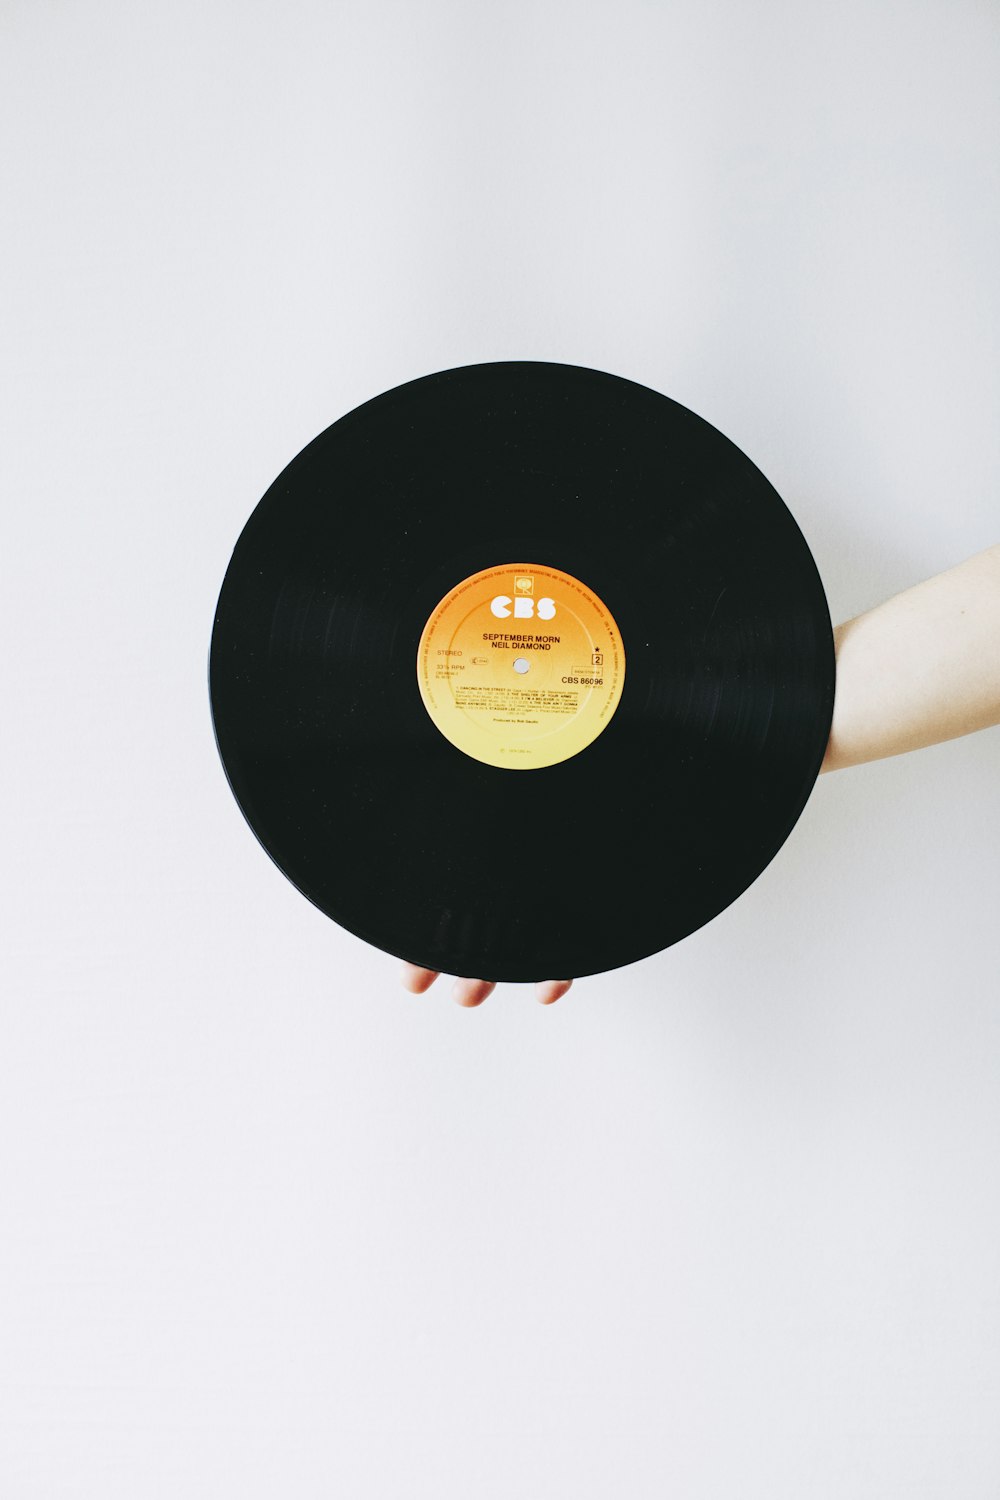 a person holding a record in their hand